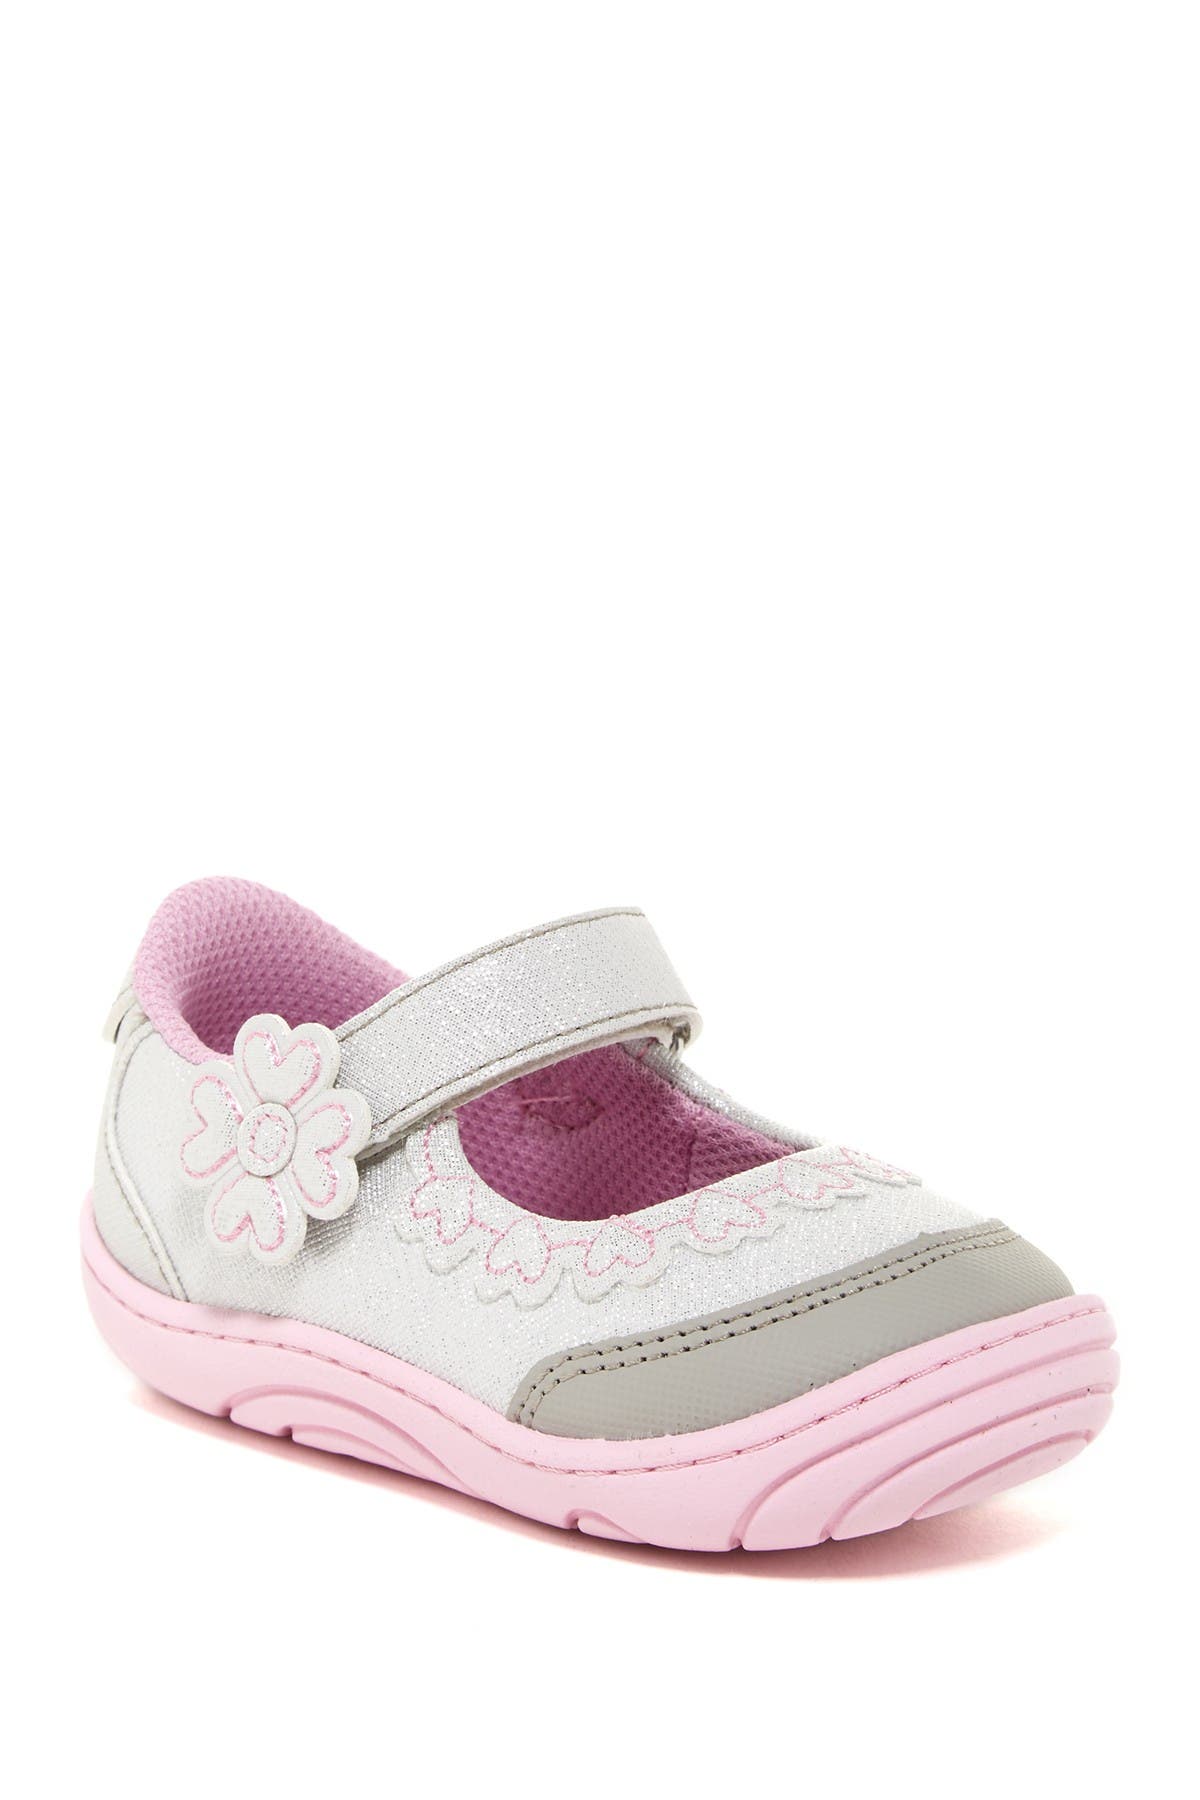 stride rite shoes for babies near me